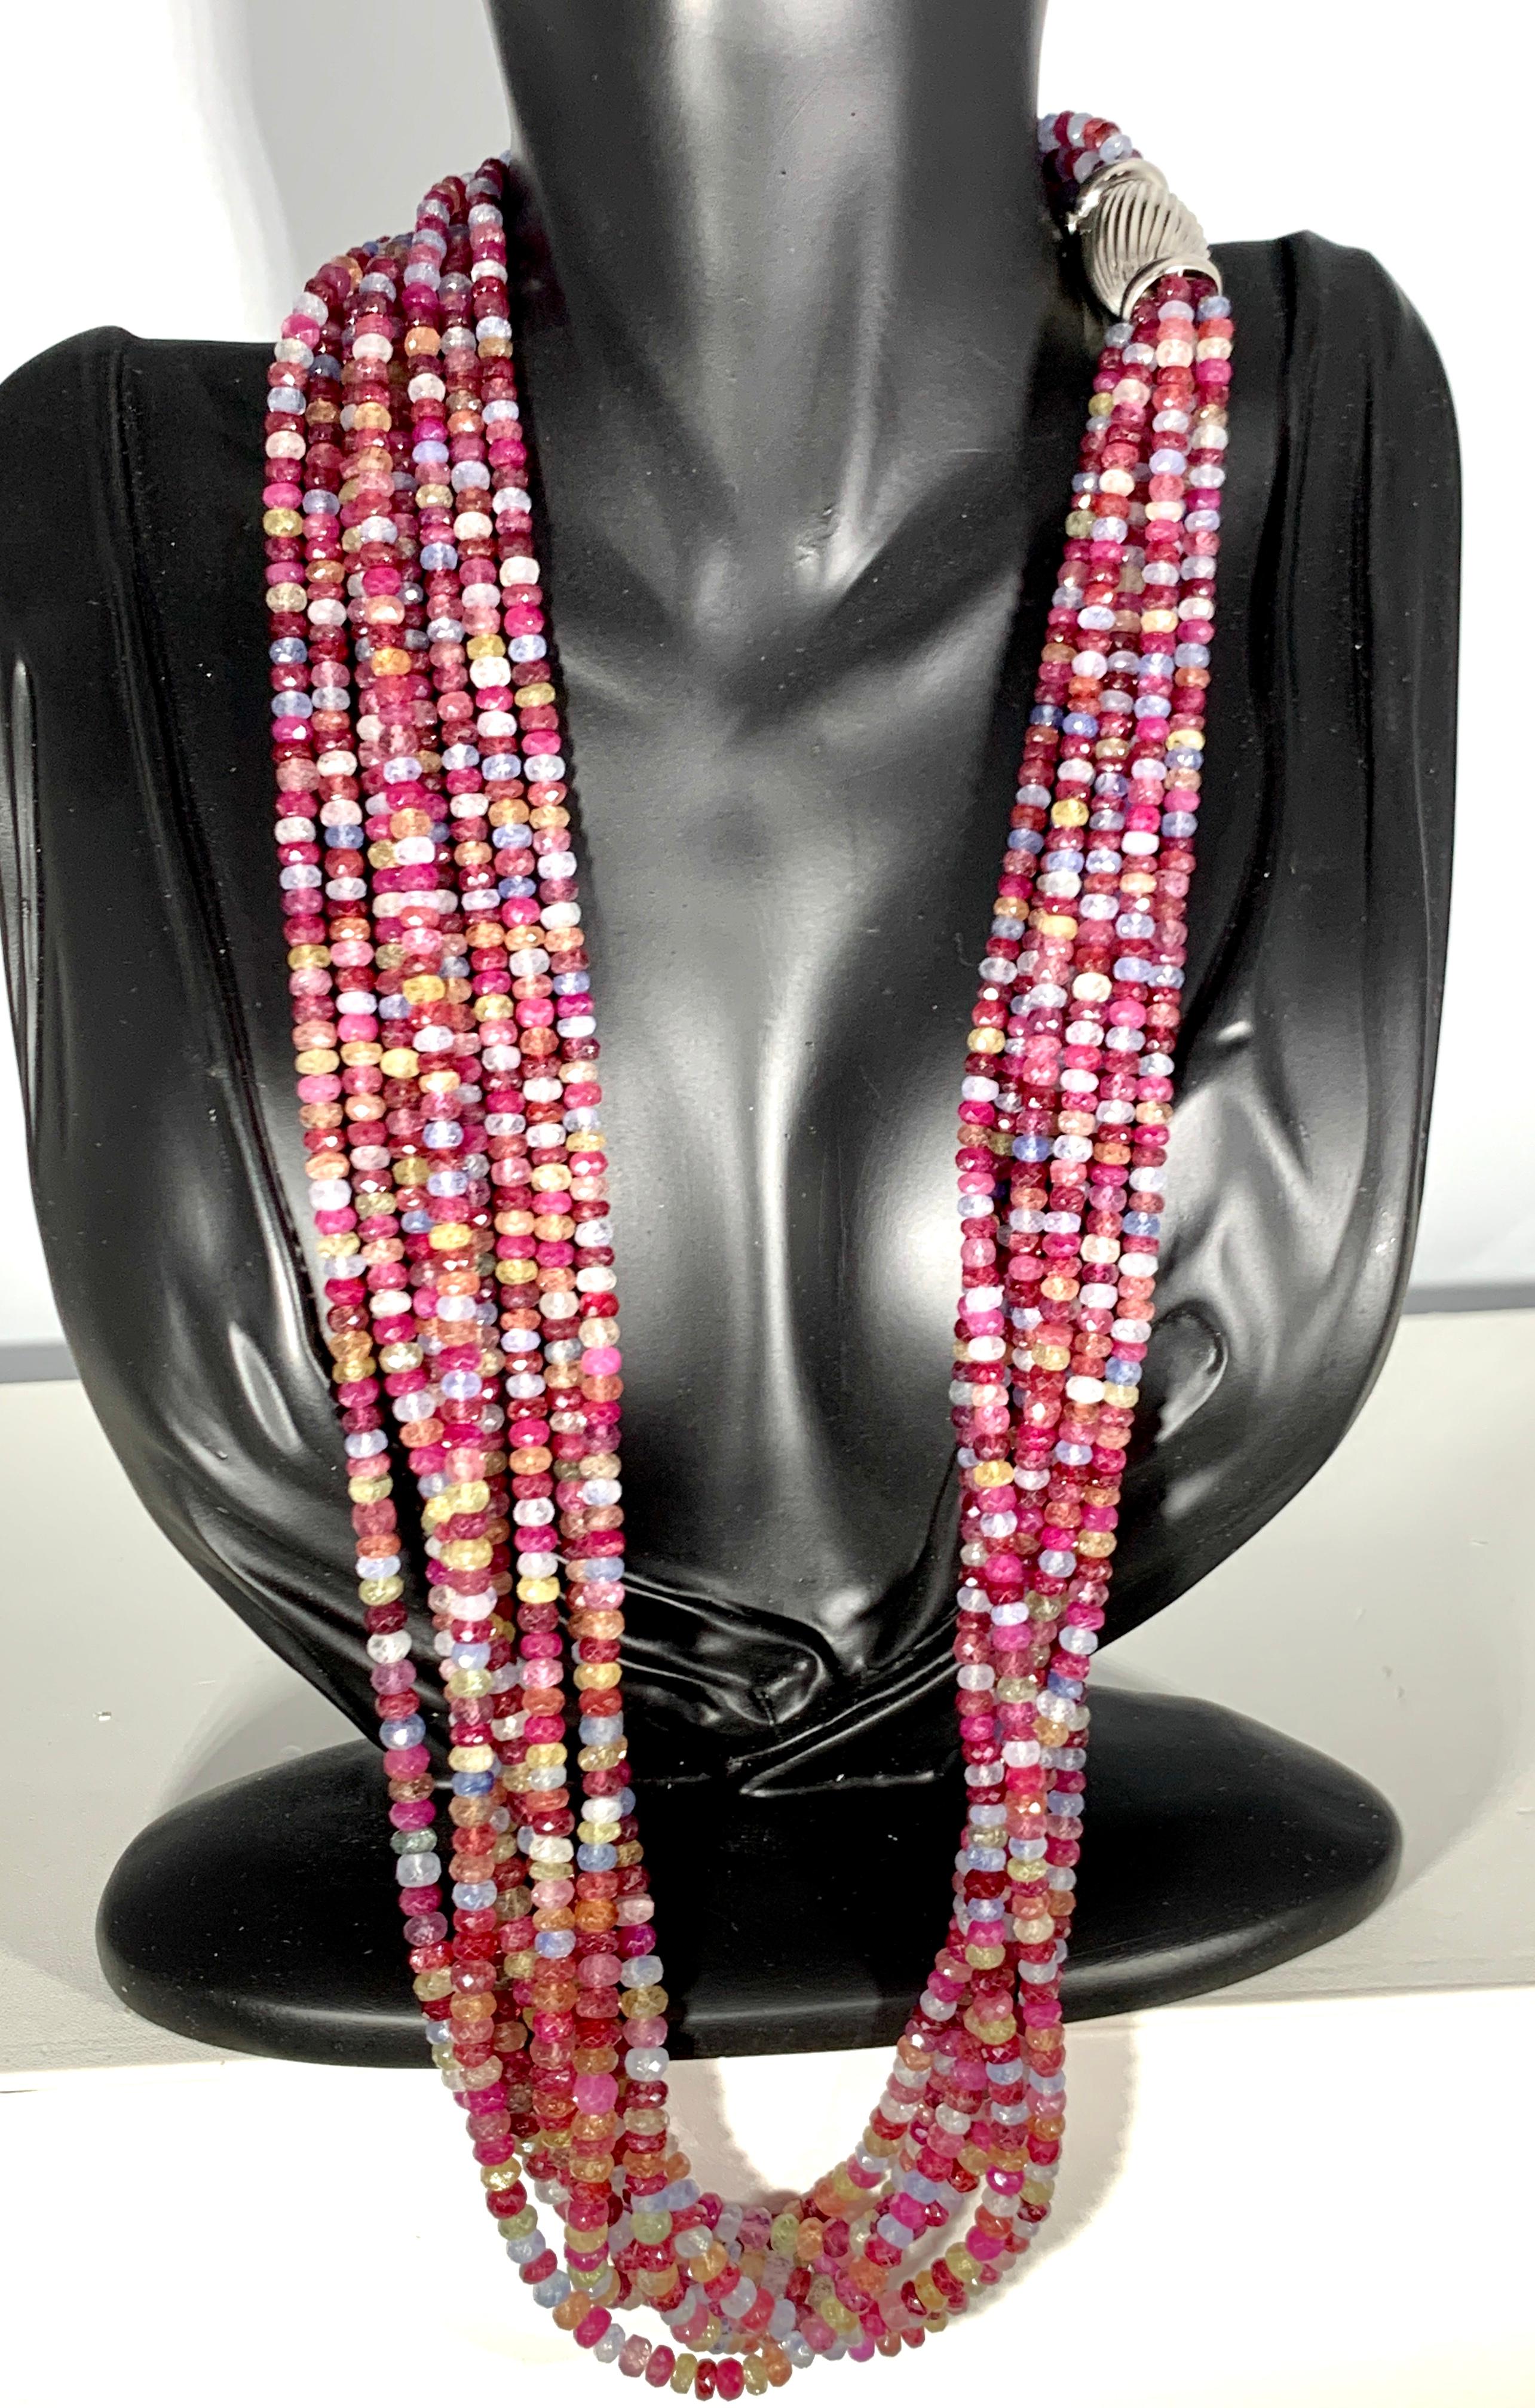  2400 Ct  8 Layer Natural Multi Sapphire Fine Bead Necklace 18 Karat White  Gold  Clasp
This spectacular Necklace   consisting of approximately 2400 Ct   of  Fine Multi Sapphire  Beads.
Colors are different shades of pink , Green , Brown and